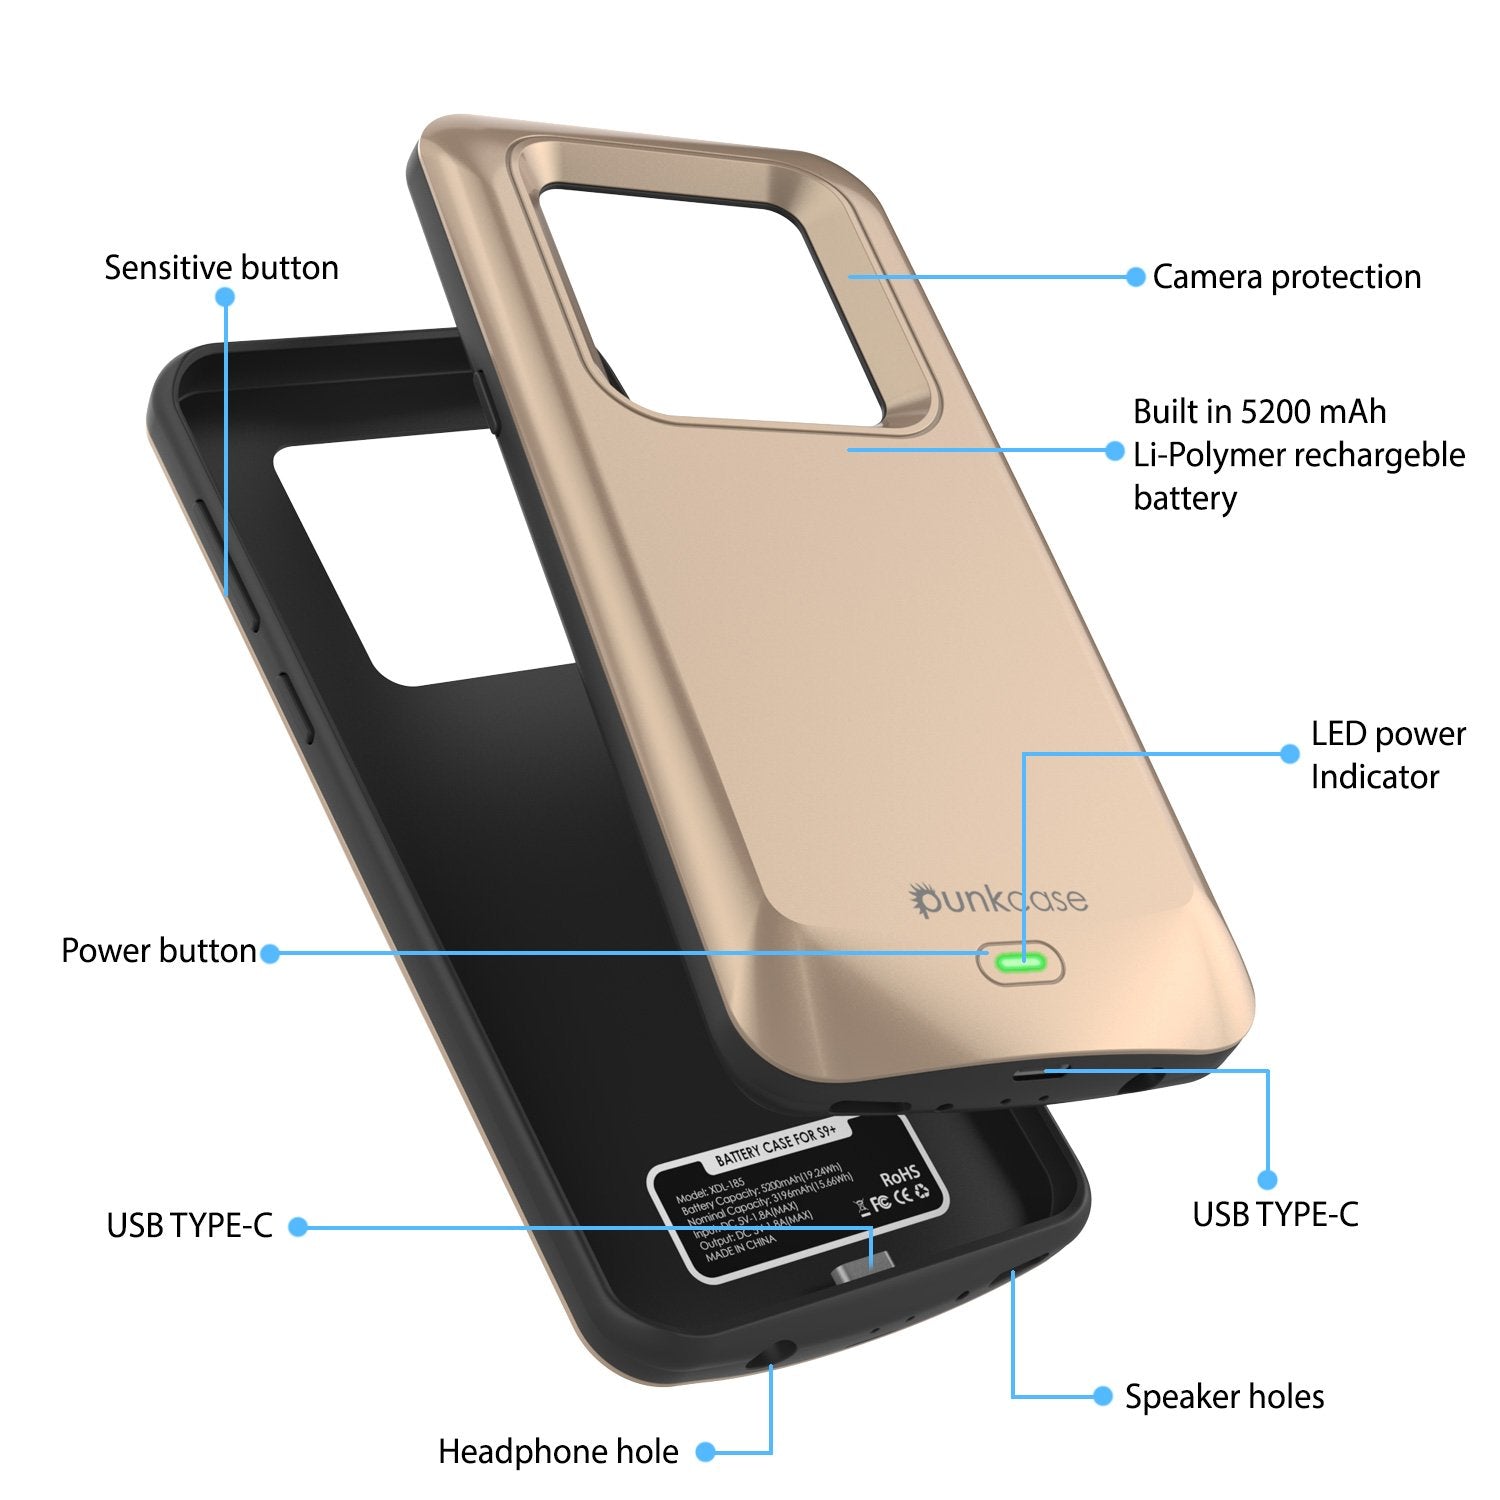 Galaxy S9 PLUS Battery Case, PunkJuice 5000mAH Fast Charging Power Bank W/ Screen Protector | Integrated USB Port | IntelSwitch | Slim, Secure and Reliable | Suitable for Samsung Galaxy S9+ [Gold] - PunkCase NZ